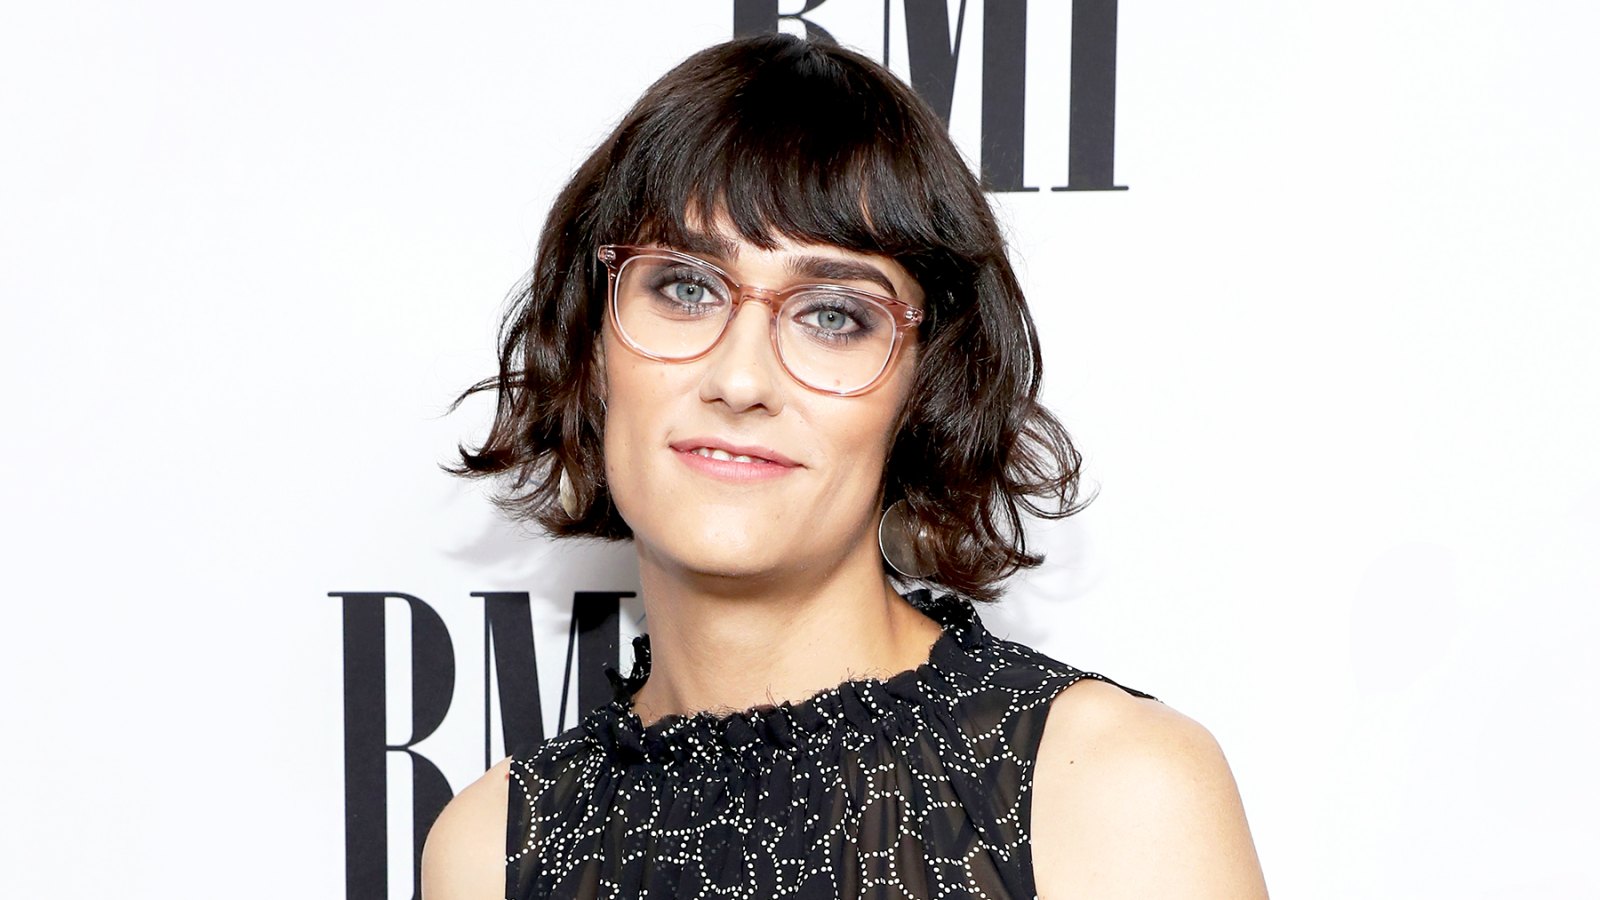 Teddy Geiger attends 66th Annual BMI Pop Awards at Regent Beverly Wilshire Hotel in Beverly Hills, California.